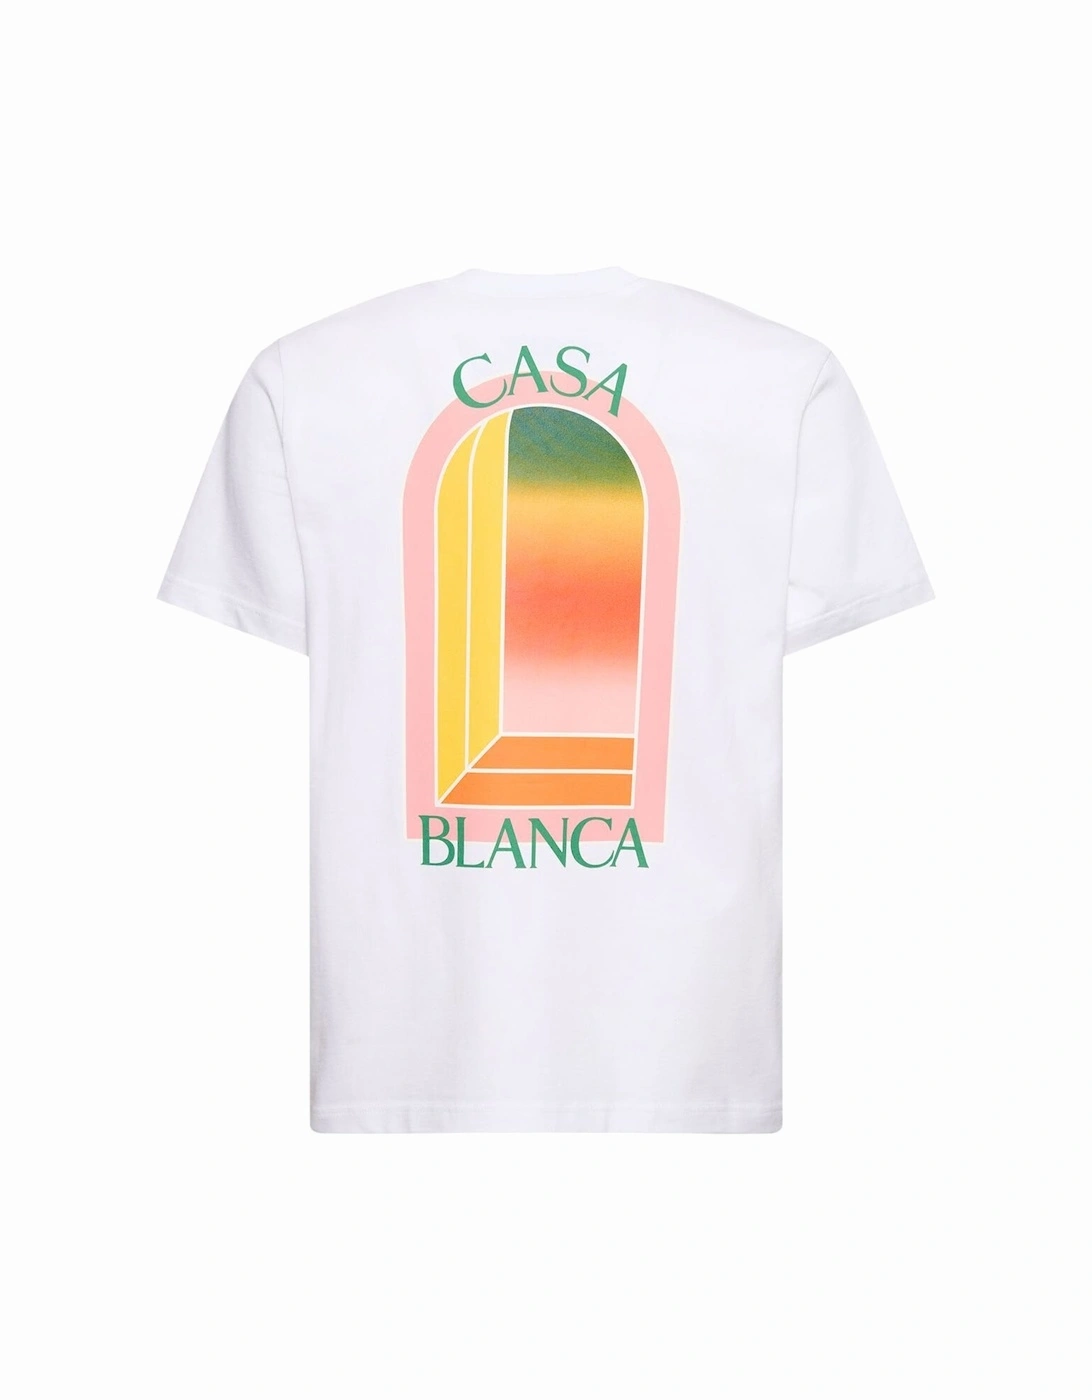 Gradient L'Arche Printed T-Shirt in White